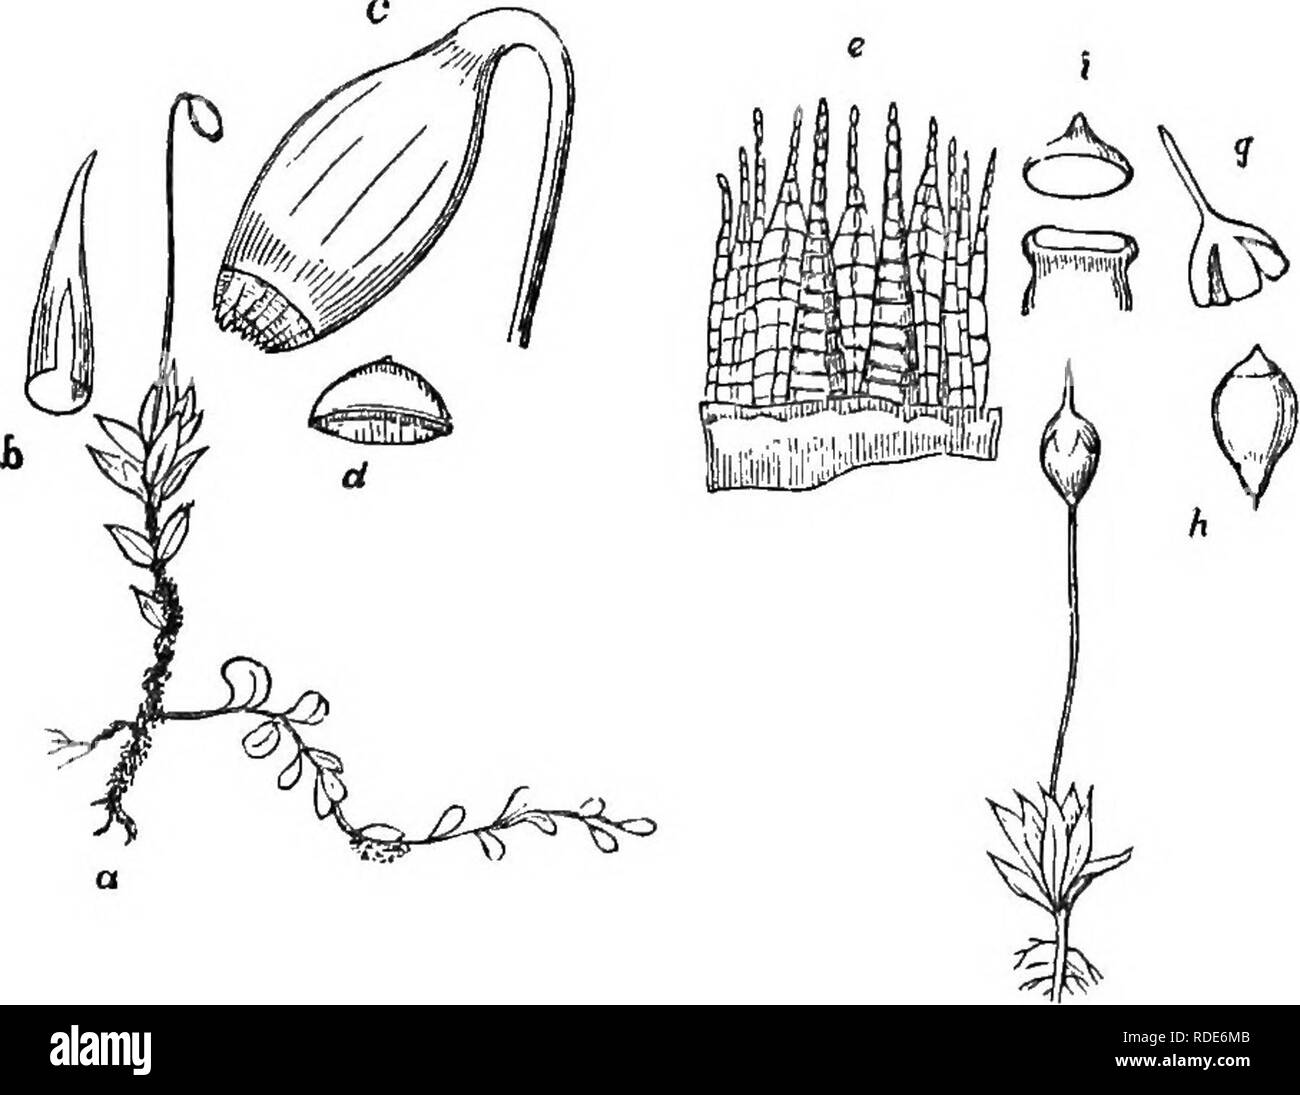 . The principles of botany, as exemplified in the Cryptogamia. For the use of schools and colleges. Cryptogams; Plant anatomy; 1853. CELLULARES, OK CELLULAR PLANTS. Fig. 29. 71. u. Bryum cuspidatiun in fruit, natural size. 6. The cuoulliform calyptra detached from the sporangium, c. Magnified sporangium, from which the operculum or lid (d) has been removed to show the peristome or mouth of the sporangium, k. A por- tion of the inner and outer peristome highly magnified. /. Physcomitrium pyriforme in fruit, showing the mitriform calyptra. g. The calyptra detached from the spo- rangium (h). i. T Stock Photo